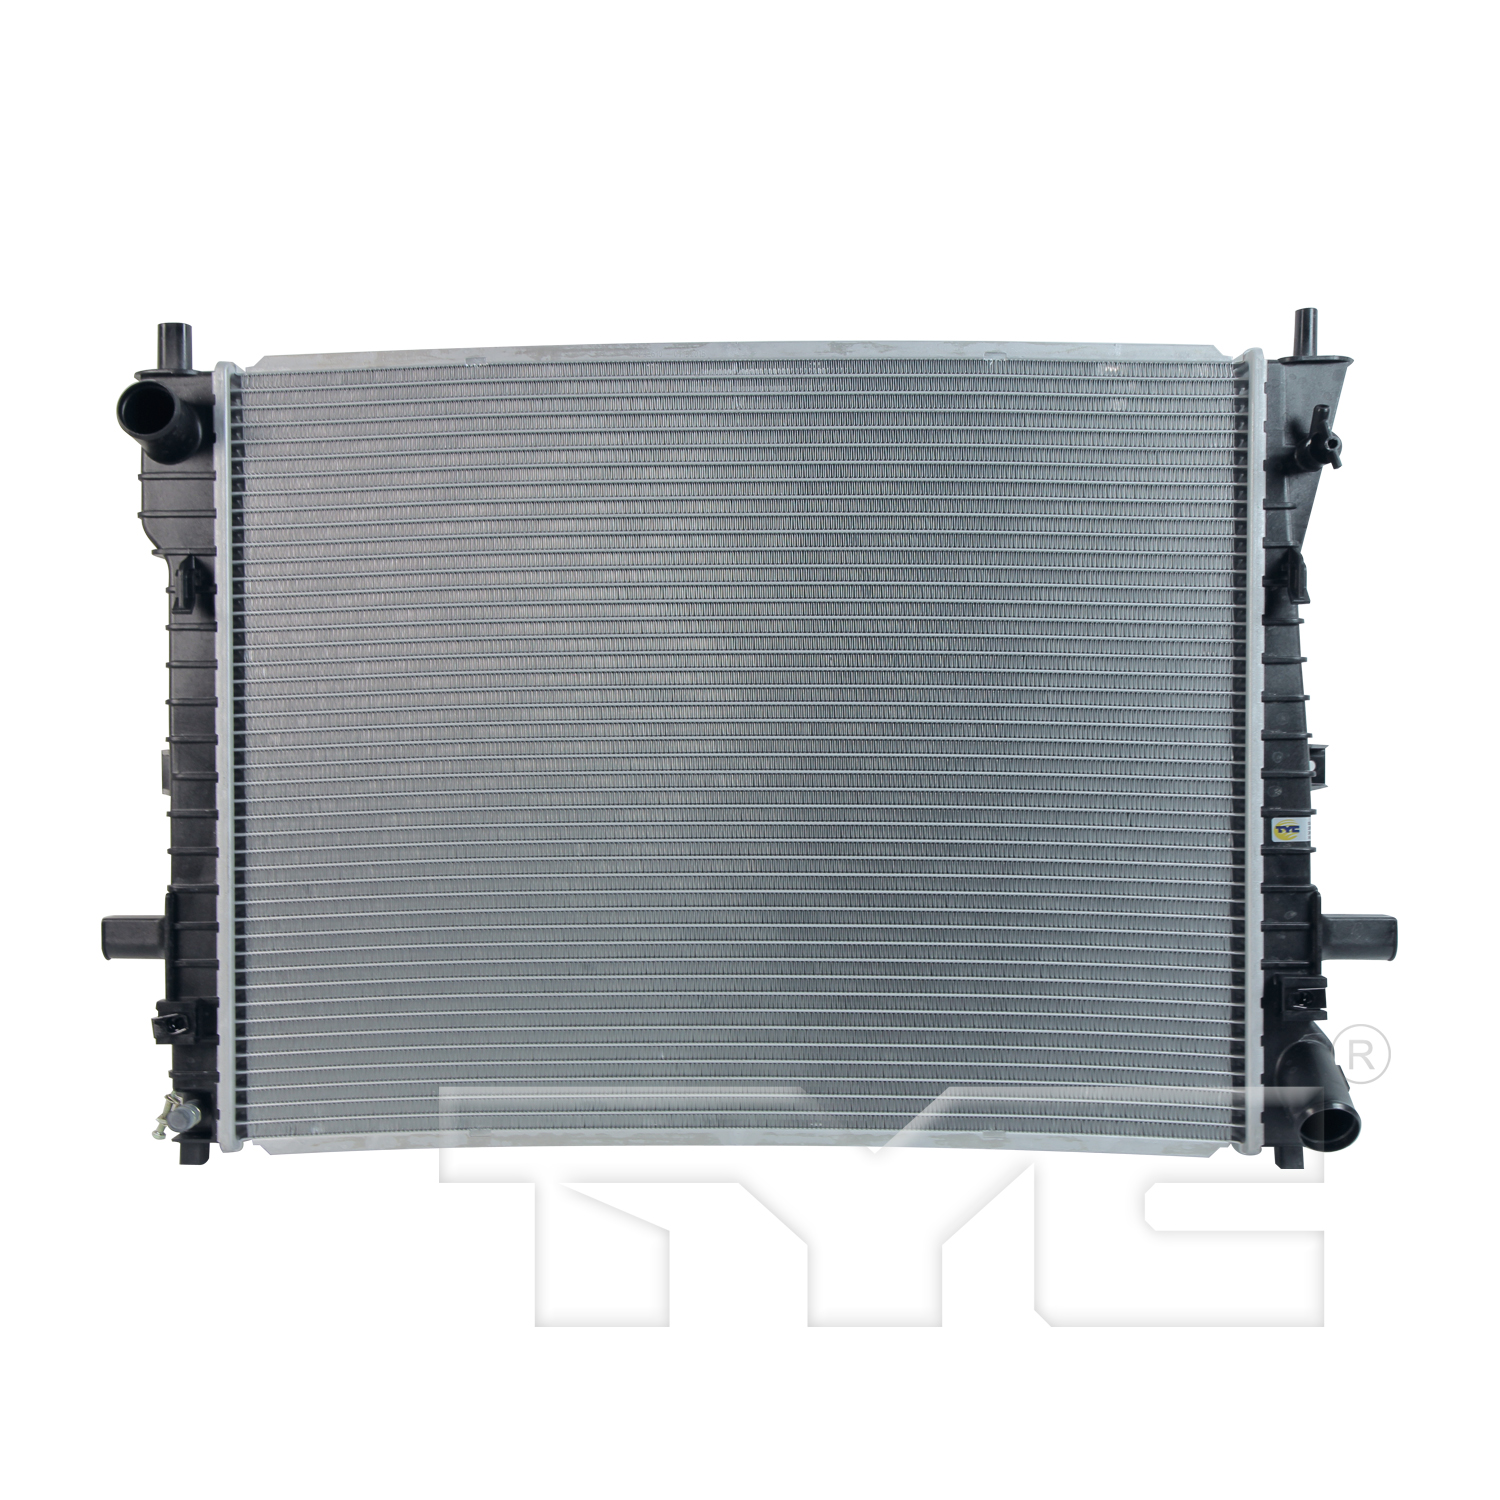 Aftermarket RADIATORS for LINCOLN - TOWN CAR, TOWN CAR,03-05,Radiator assembly